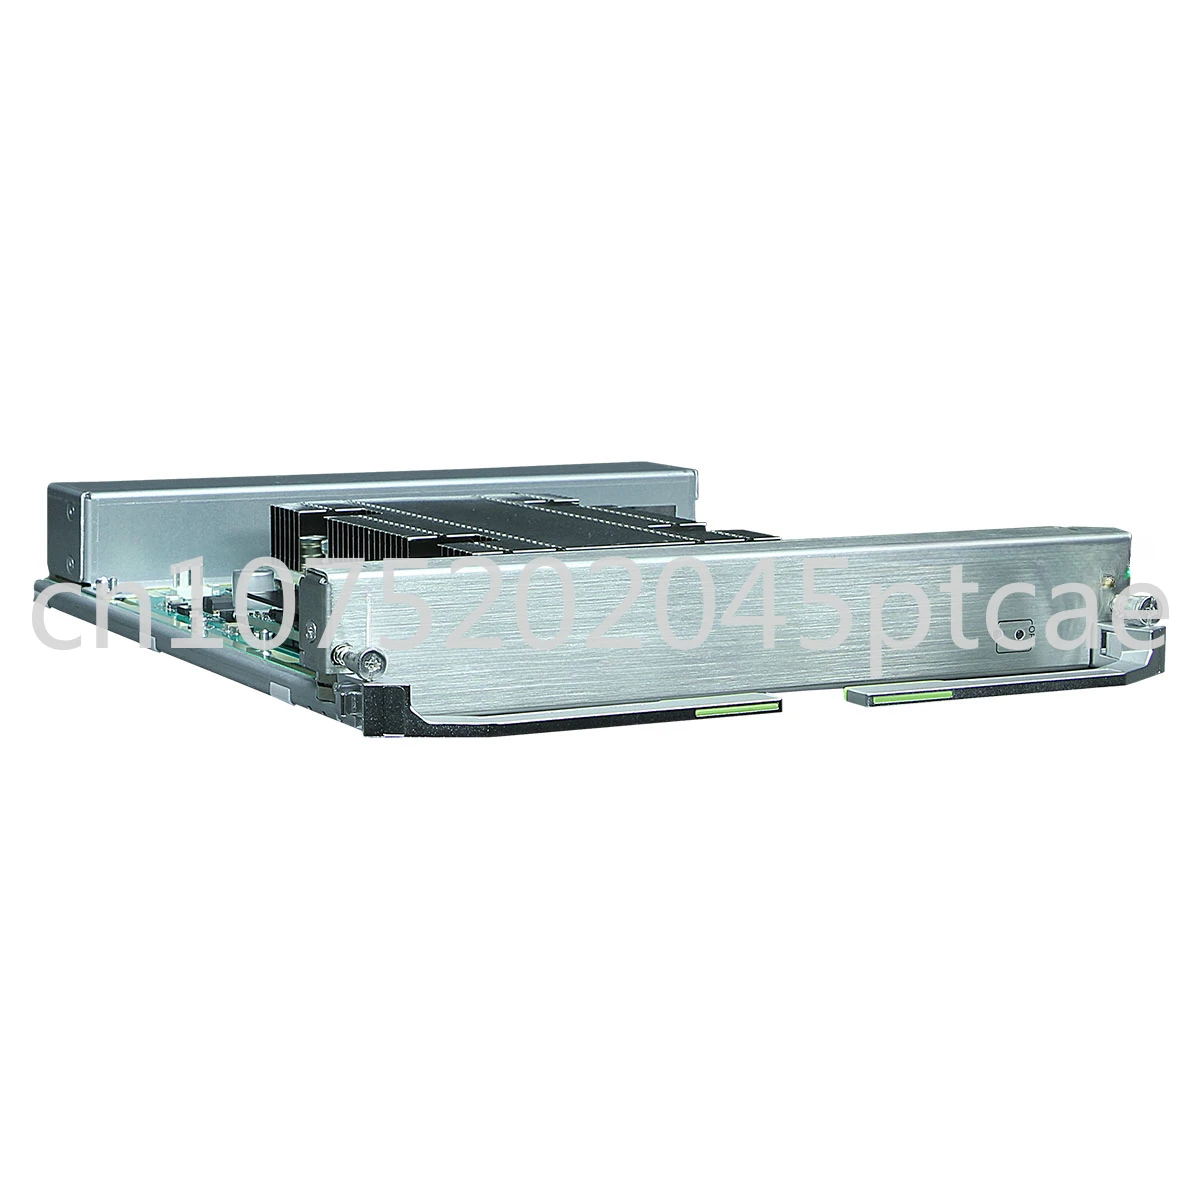 

CE-SFU04G Switch Fabric Unit for CE12804 Chassis